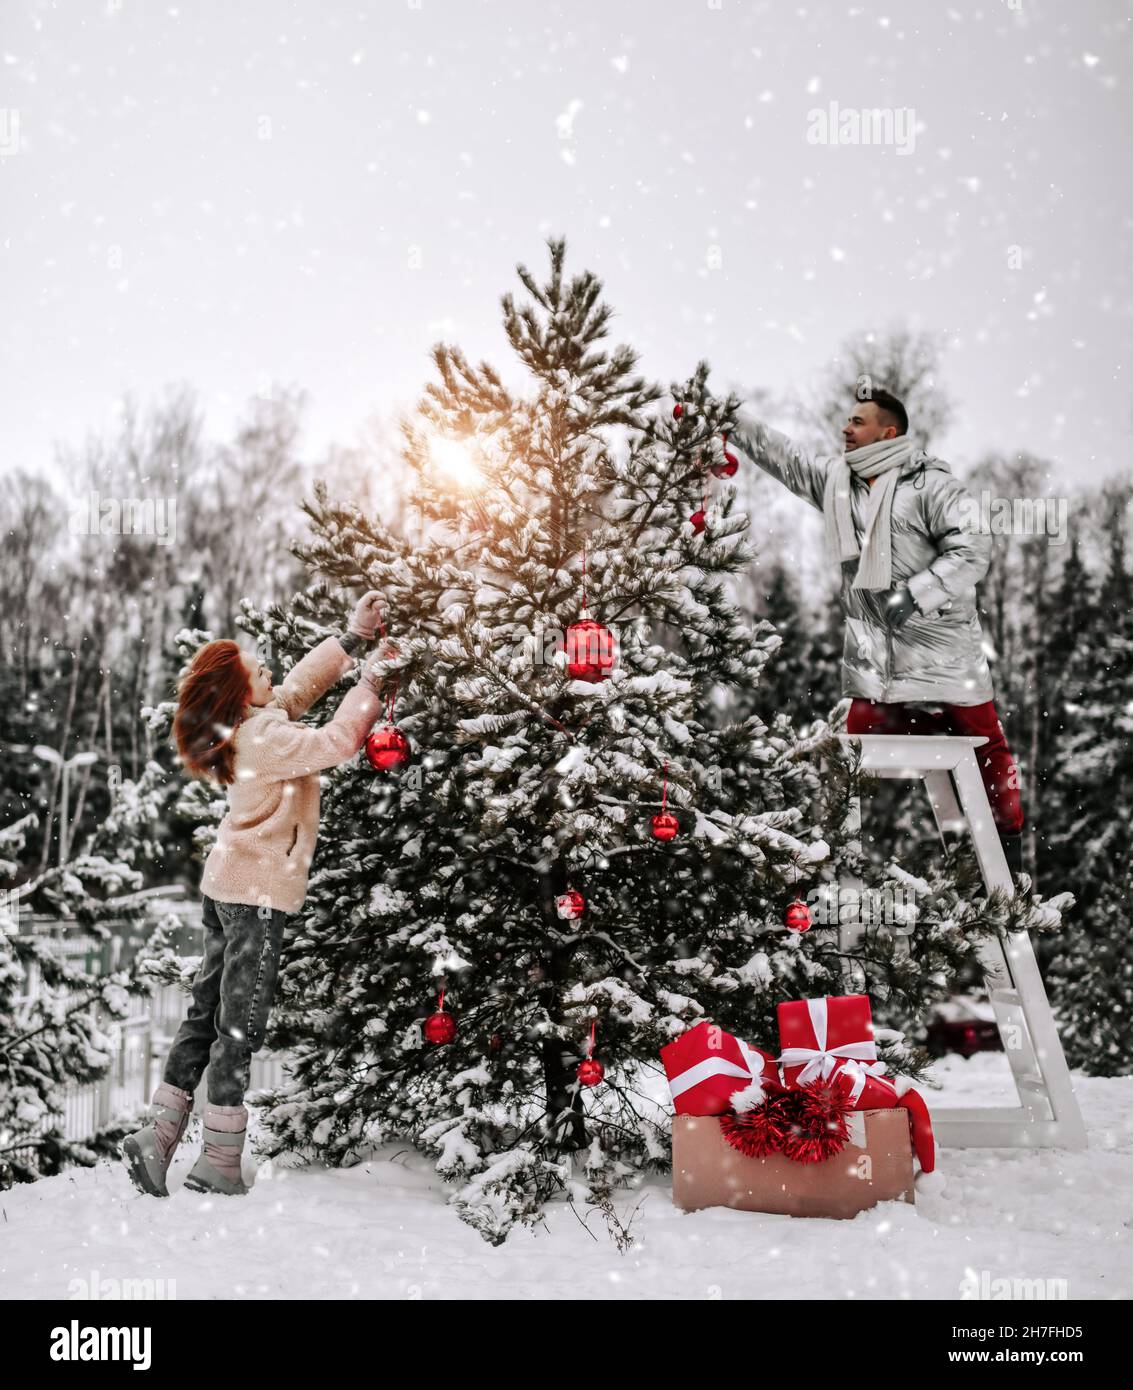 Young happy couple in stylish winter clothing decorating Christmas tree with balls outdoors in winter snowy forest Stock Photo